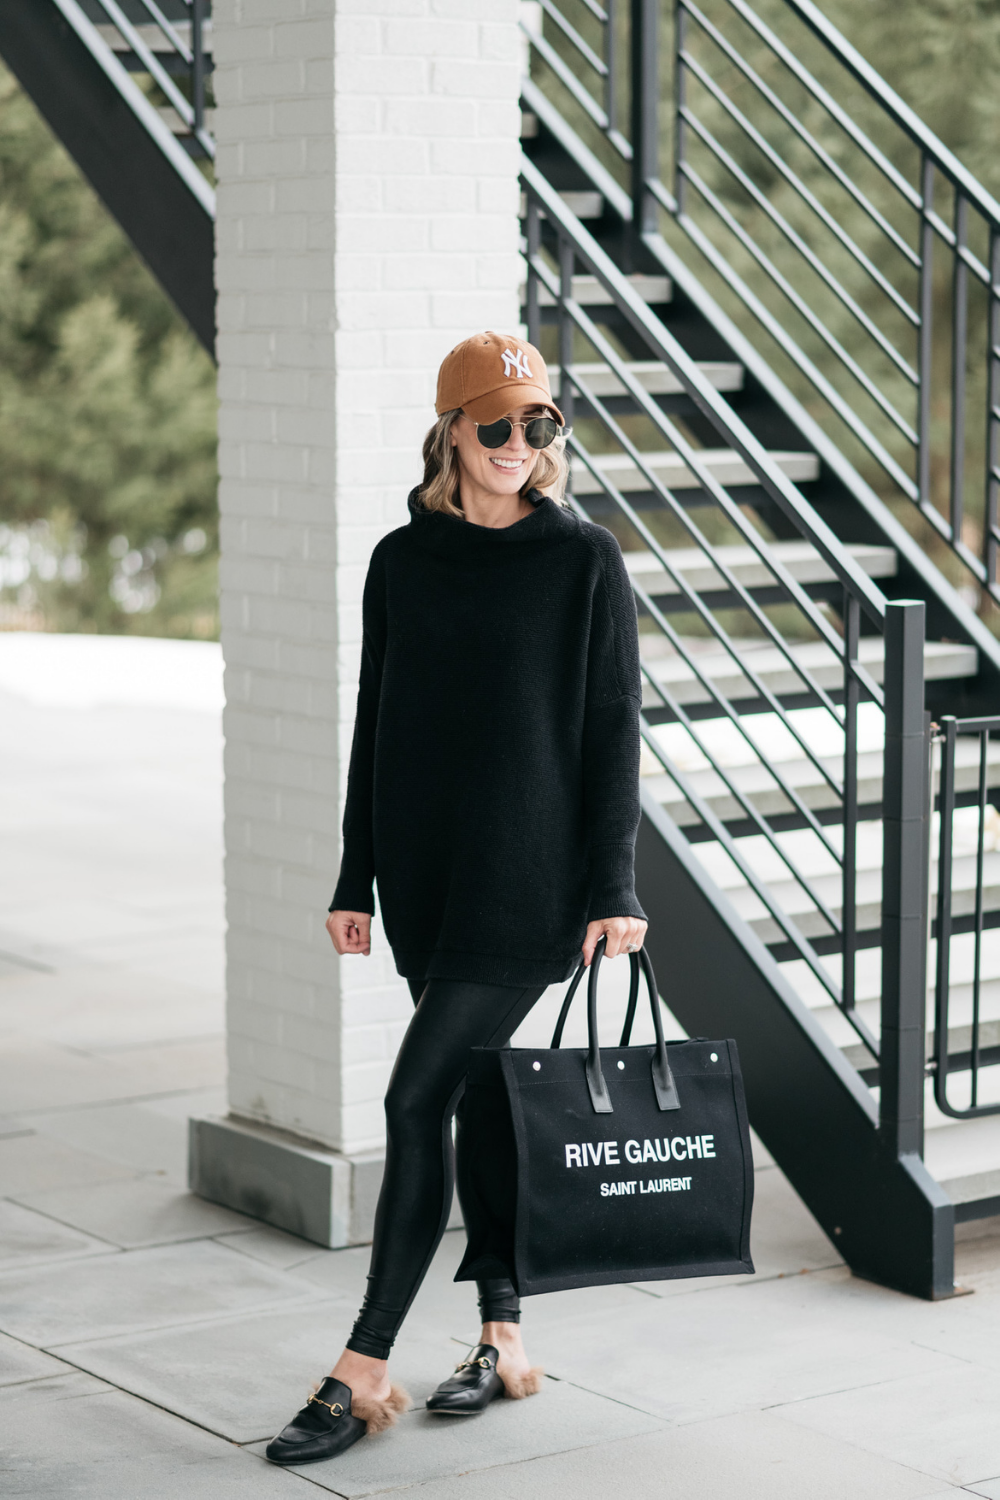 Suzanne wearing a black tunic, Spanx leggings, mules, a tote